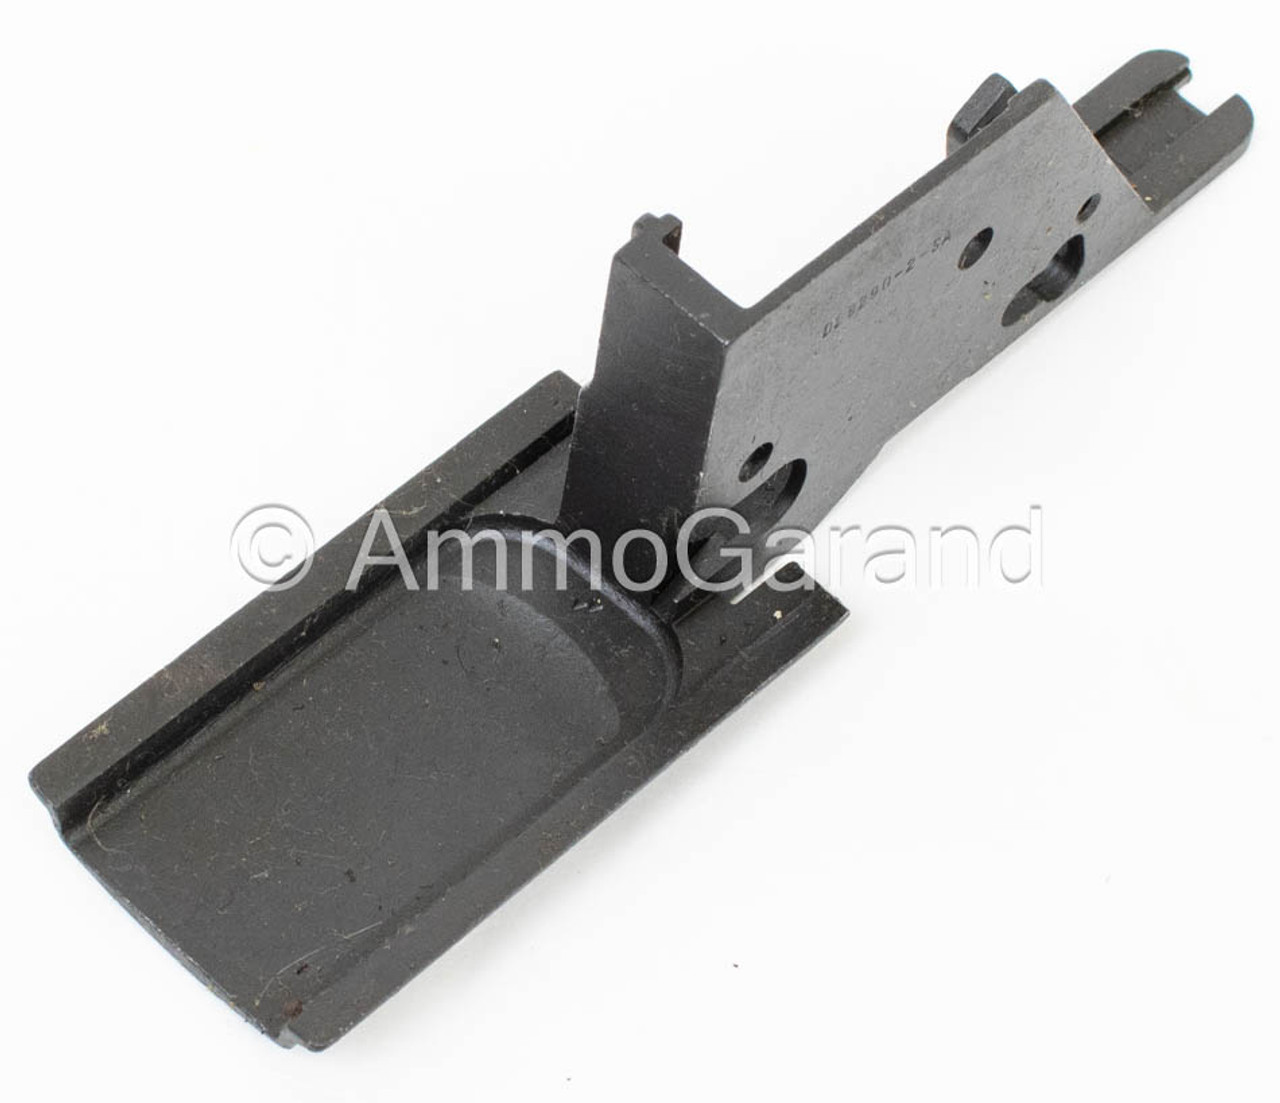 M1 Garand Trigger Housing D28290-2-SA Springfield WWII - Refinished